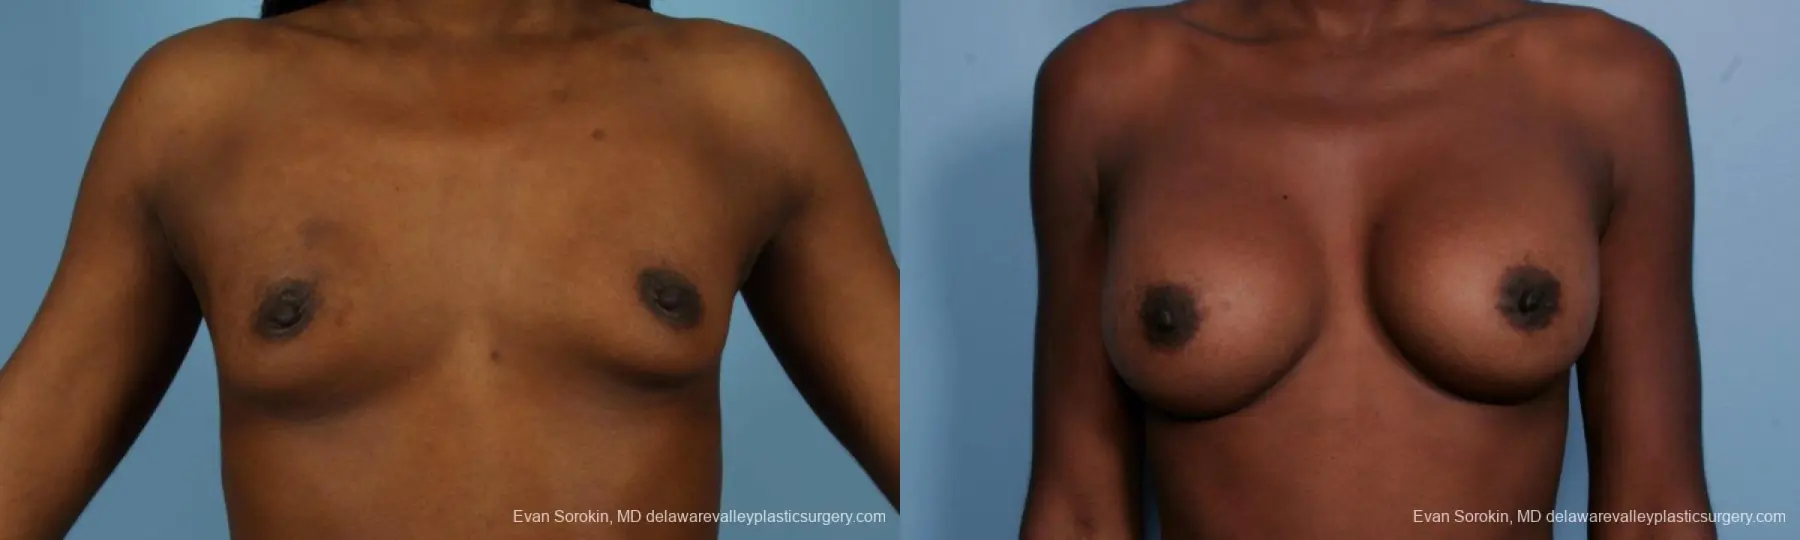 Philadelphia Breast Augmentation 8655 - Before and After